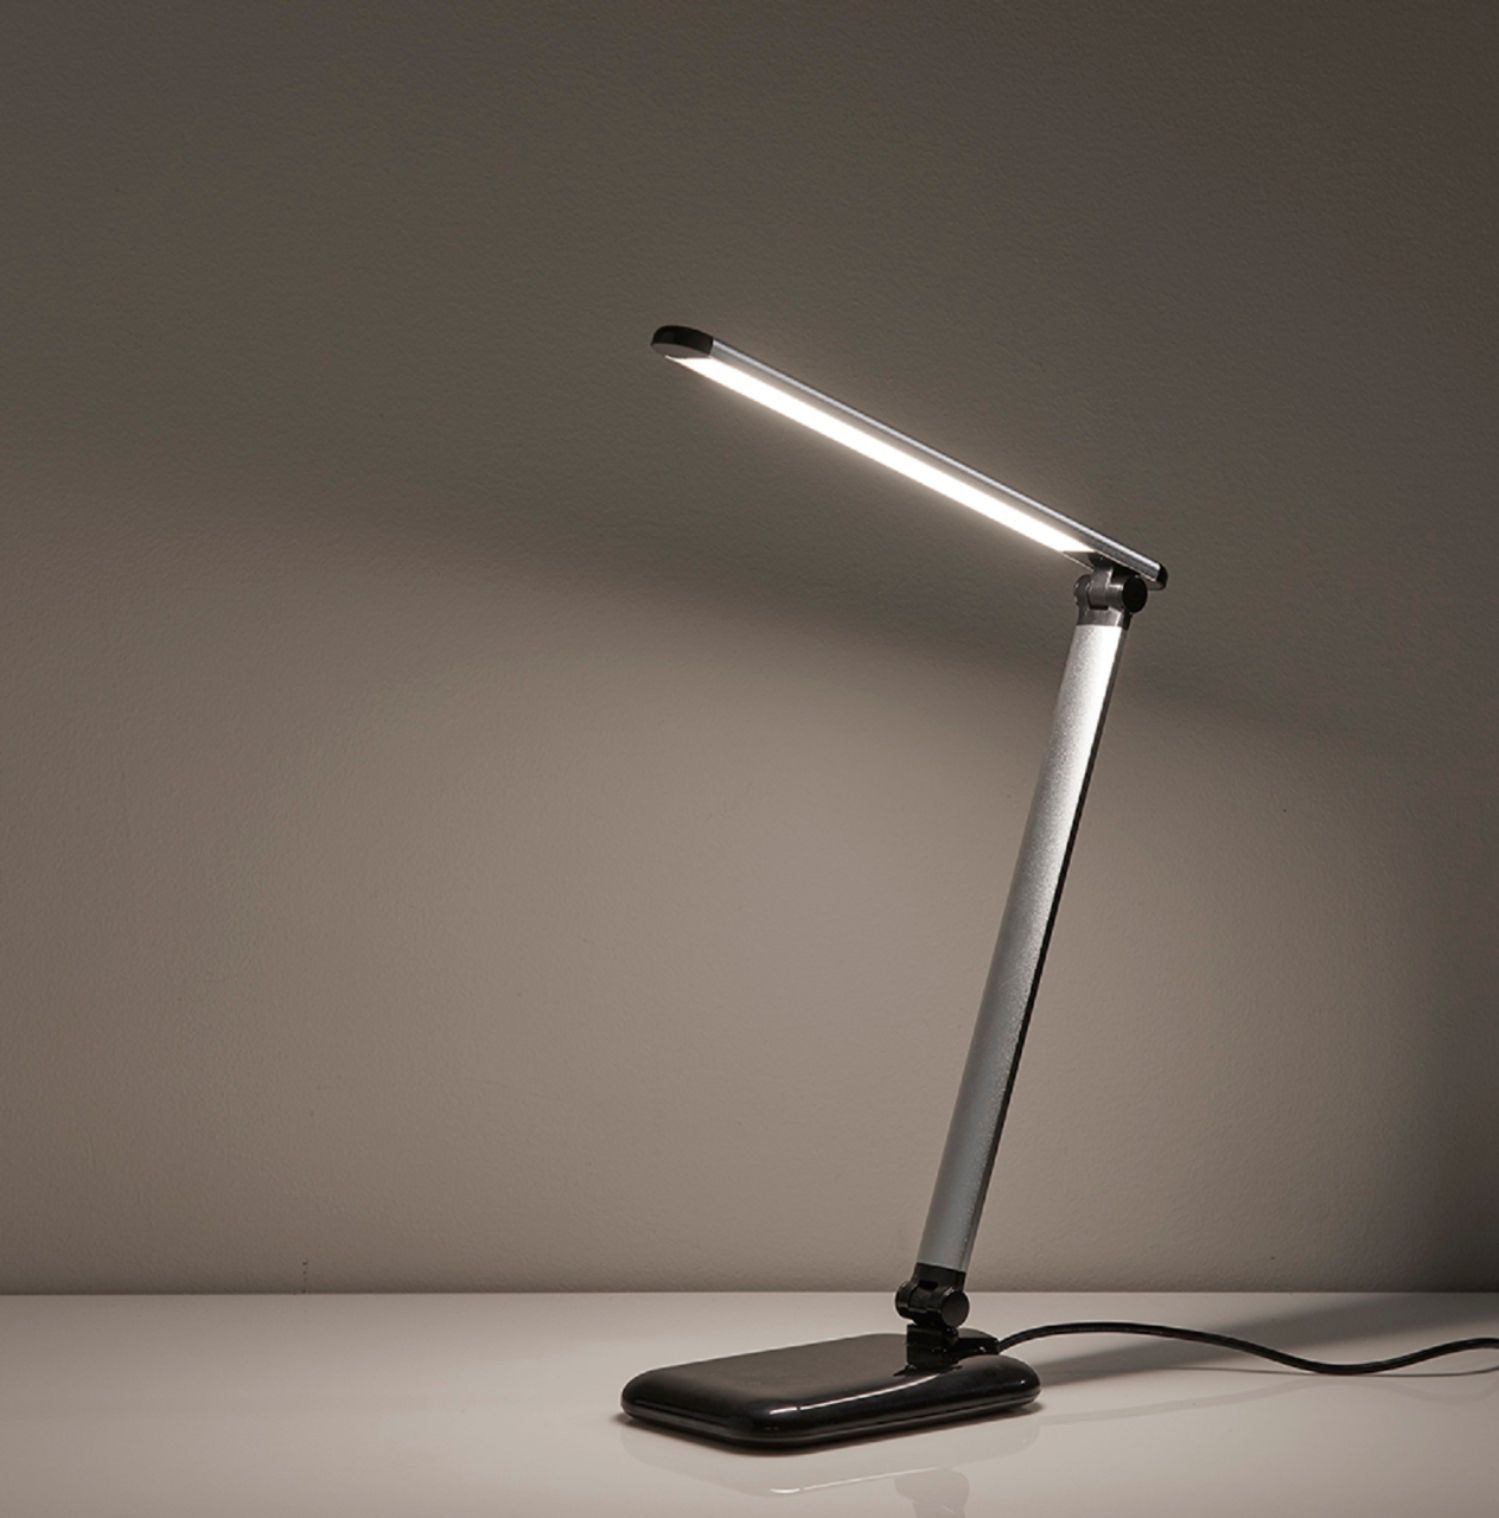 This $14 Desk Lamp Can Work Unplugged, For Up To 6 Hours